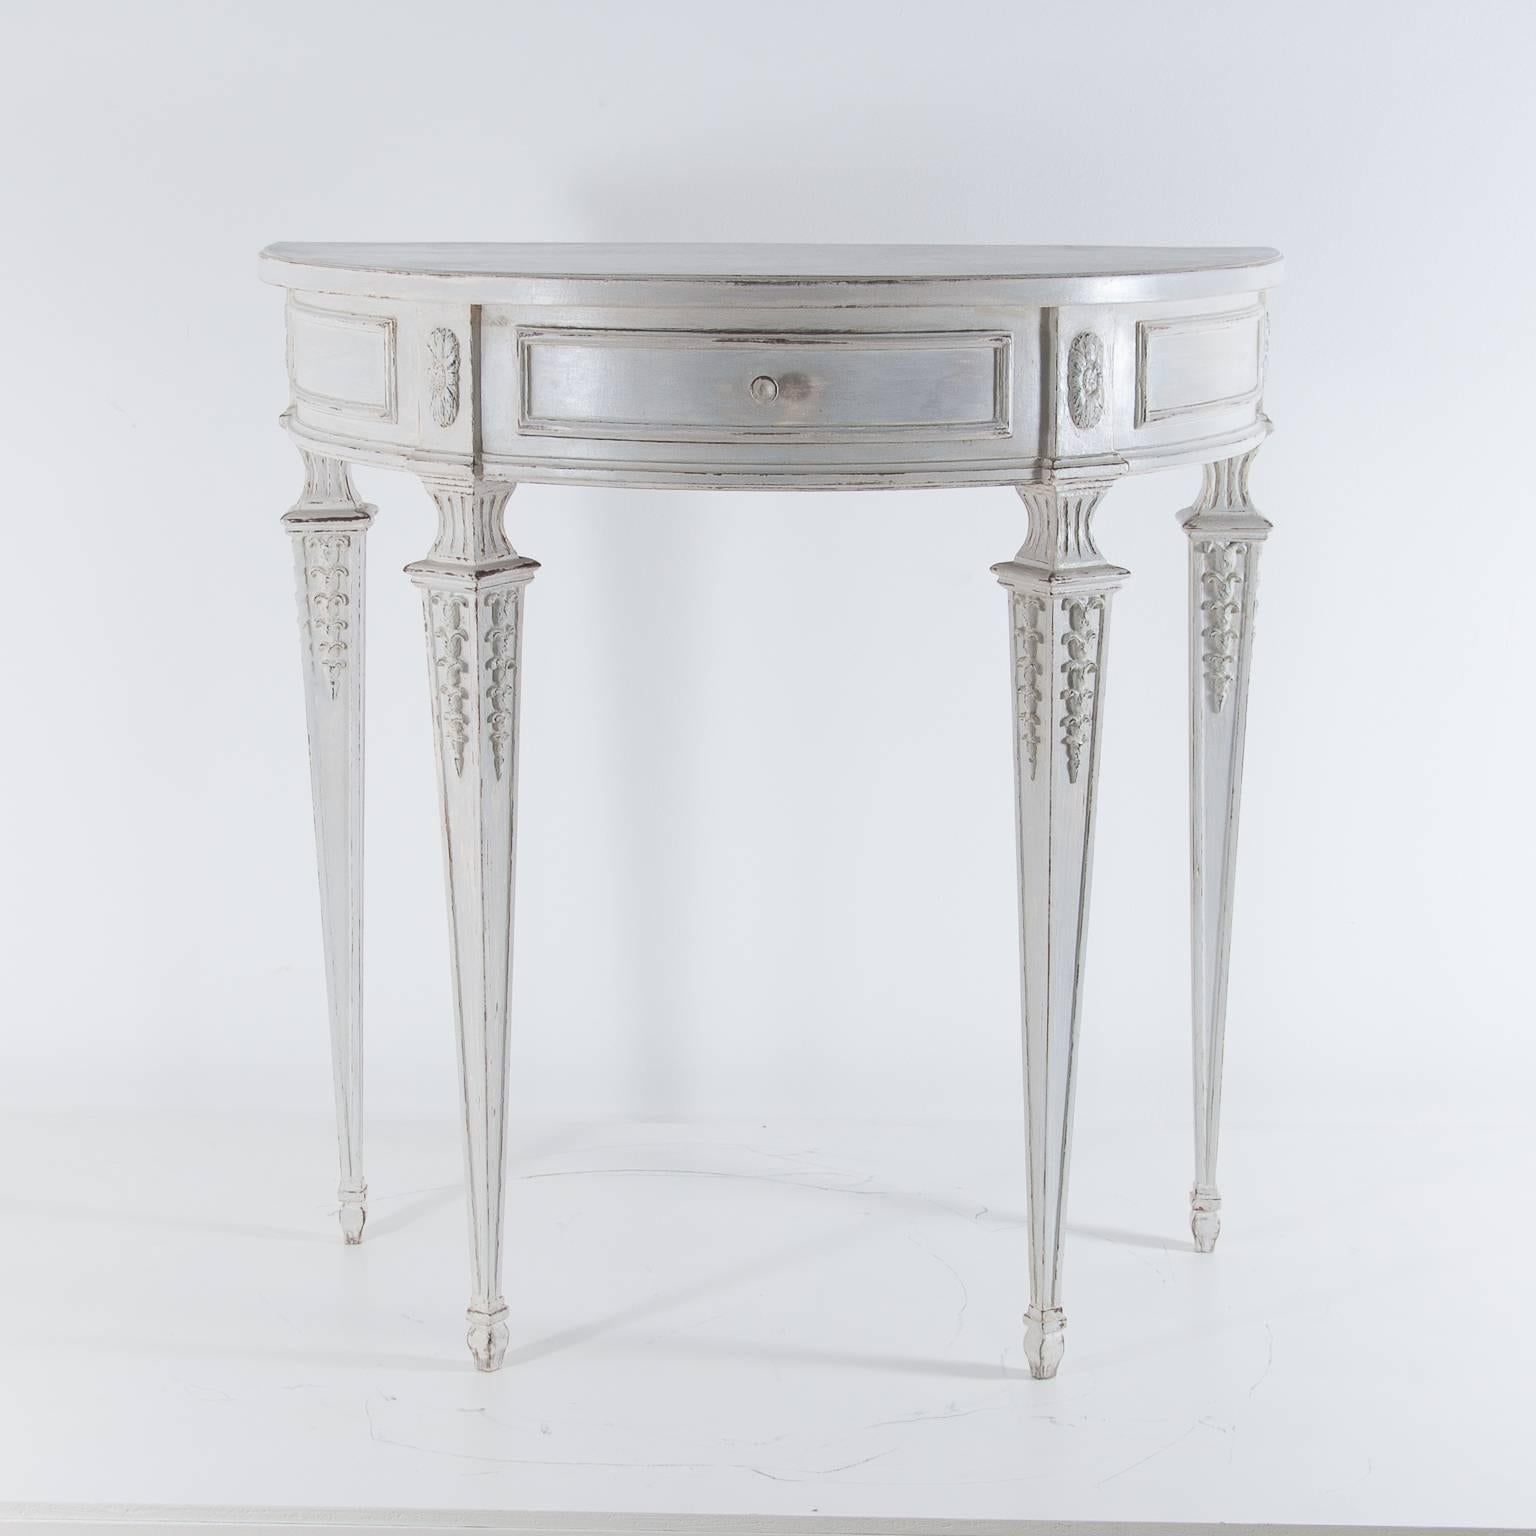 A Pair of very elegant Swedish Demi Lune consoles from the 20th century.

The consoles are painted lovely Swedish white and grey distressed finish. 